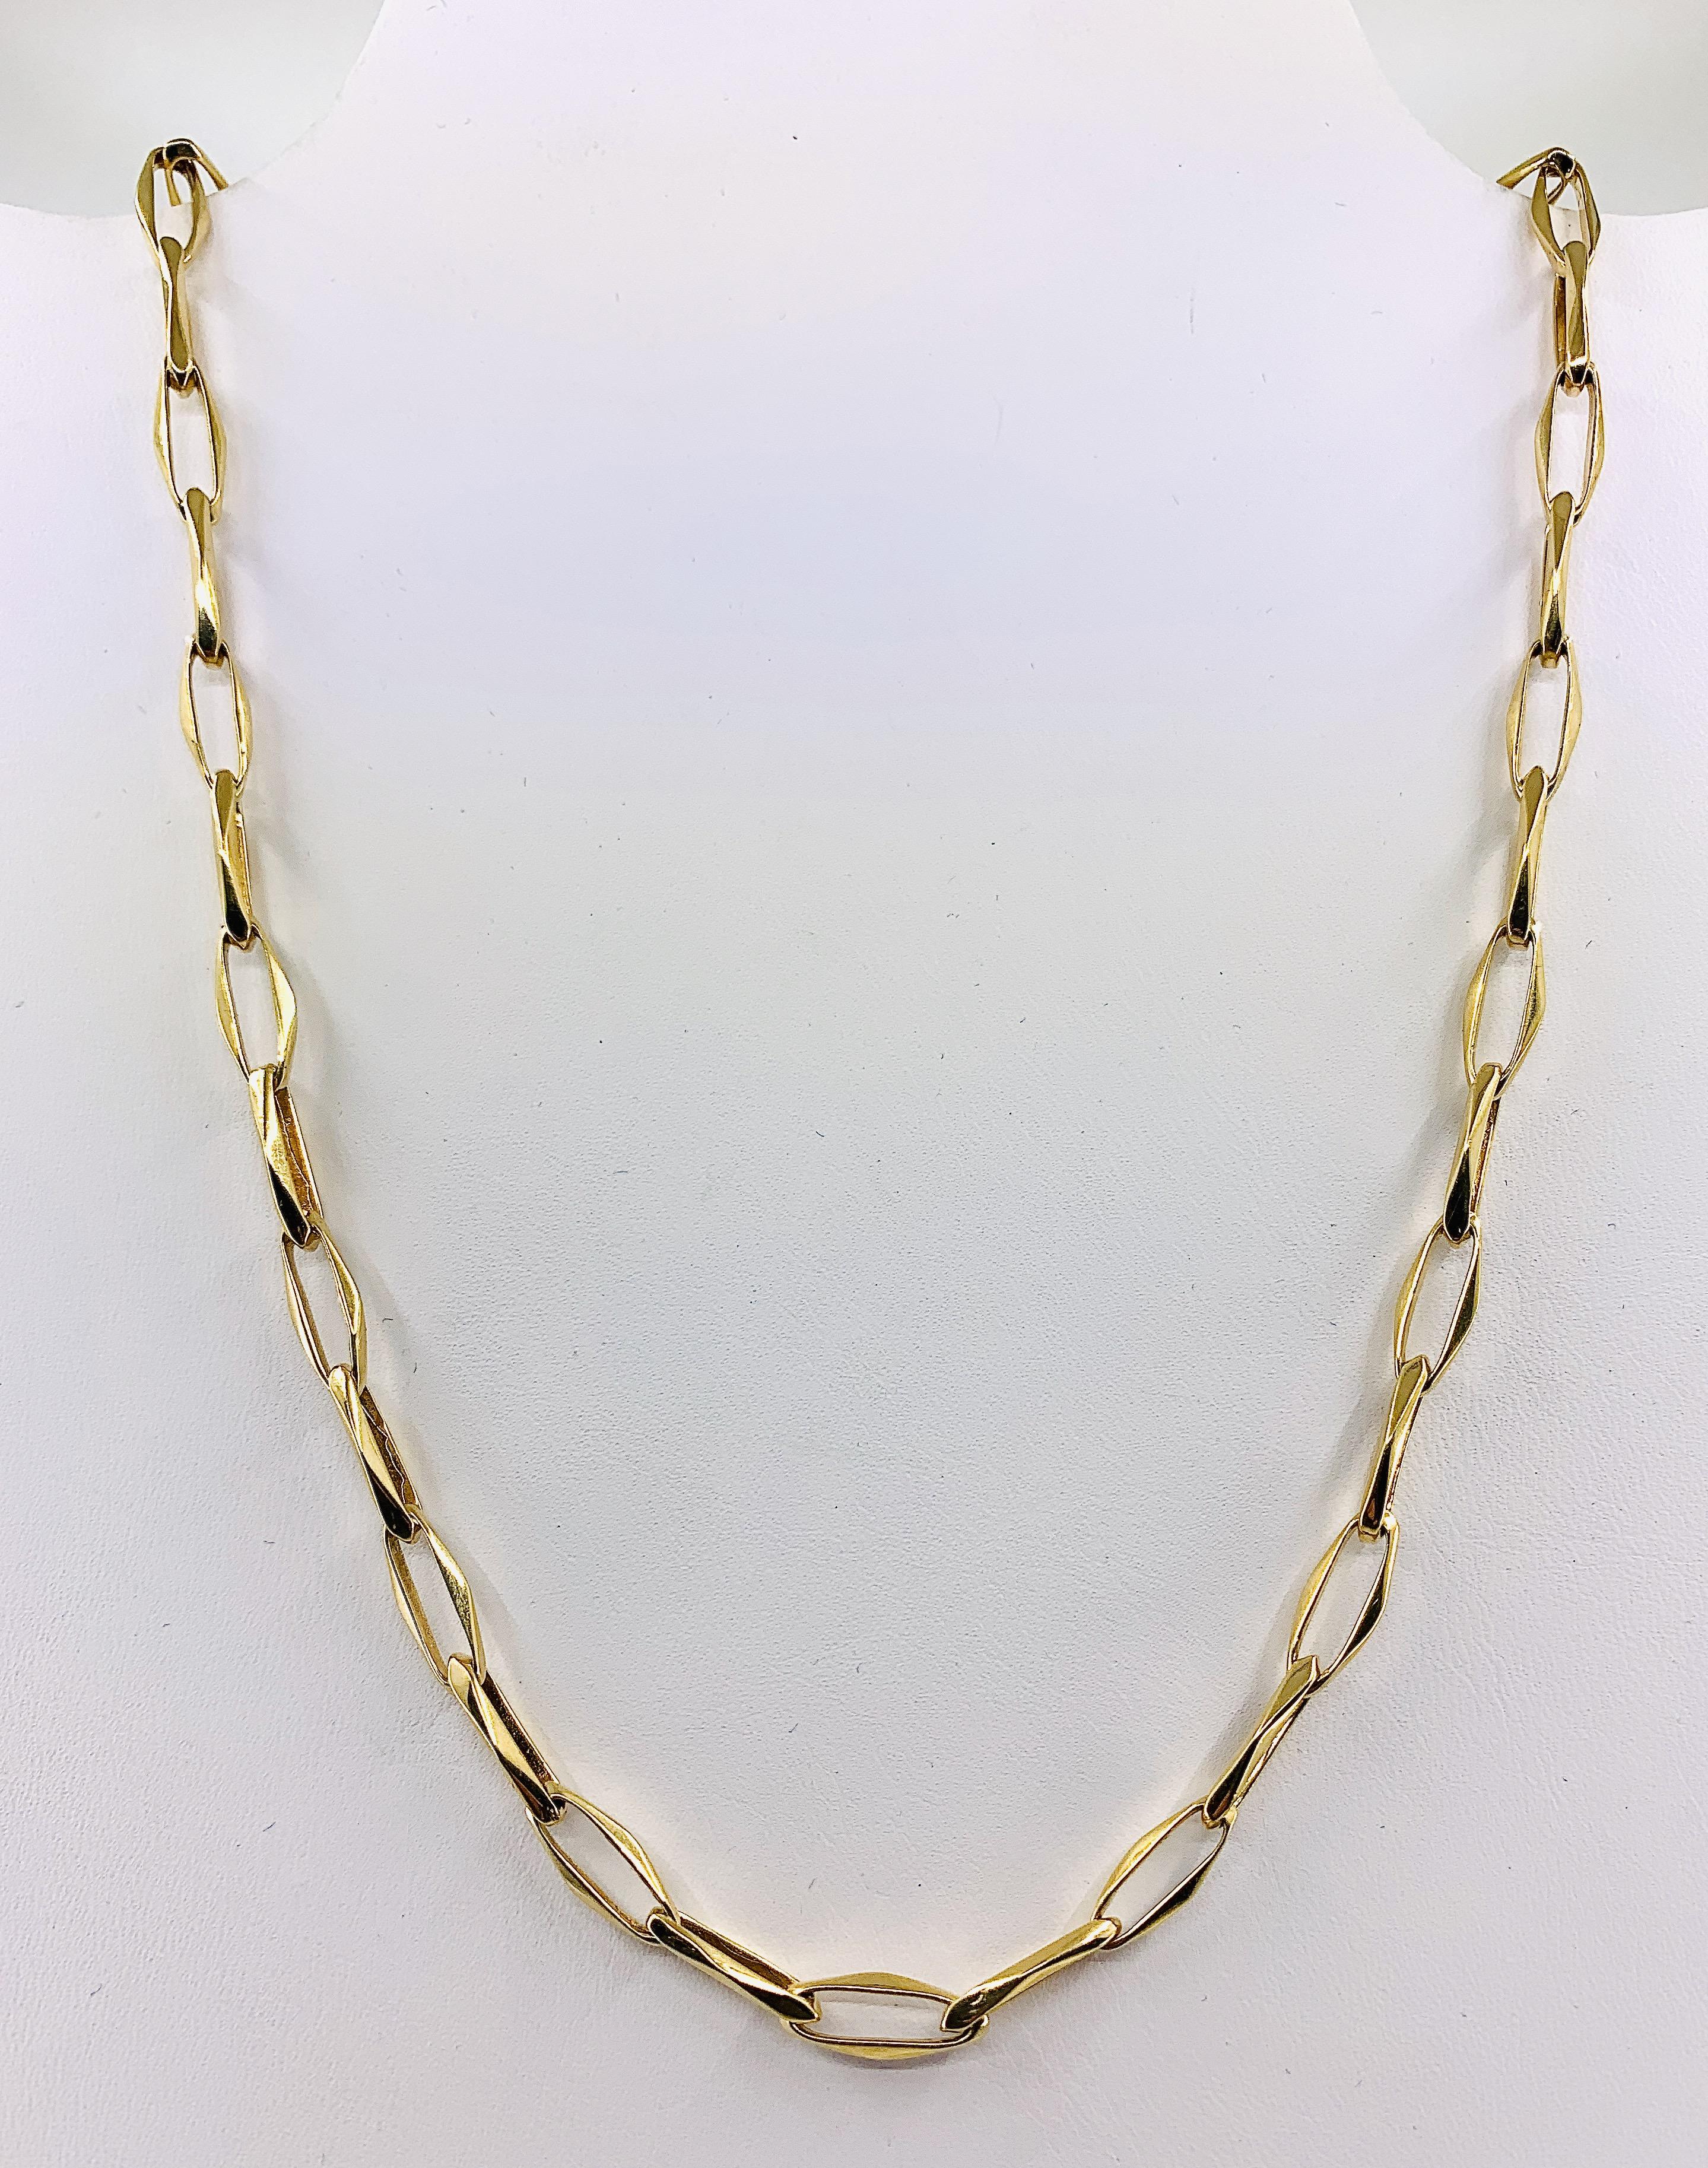 Women's or Men's Chain with Elongated, Sculptural Links in Yellow Gold, circa 1990